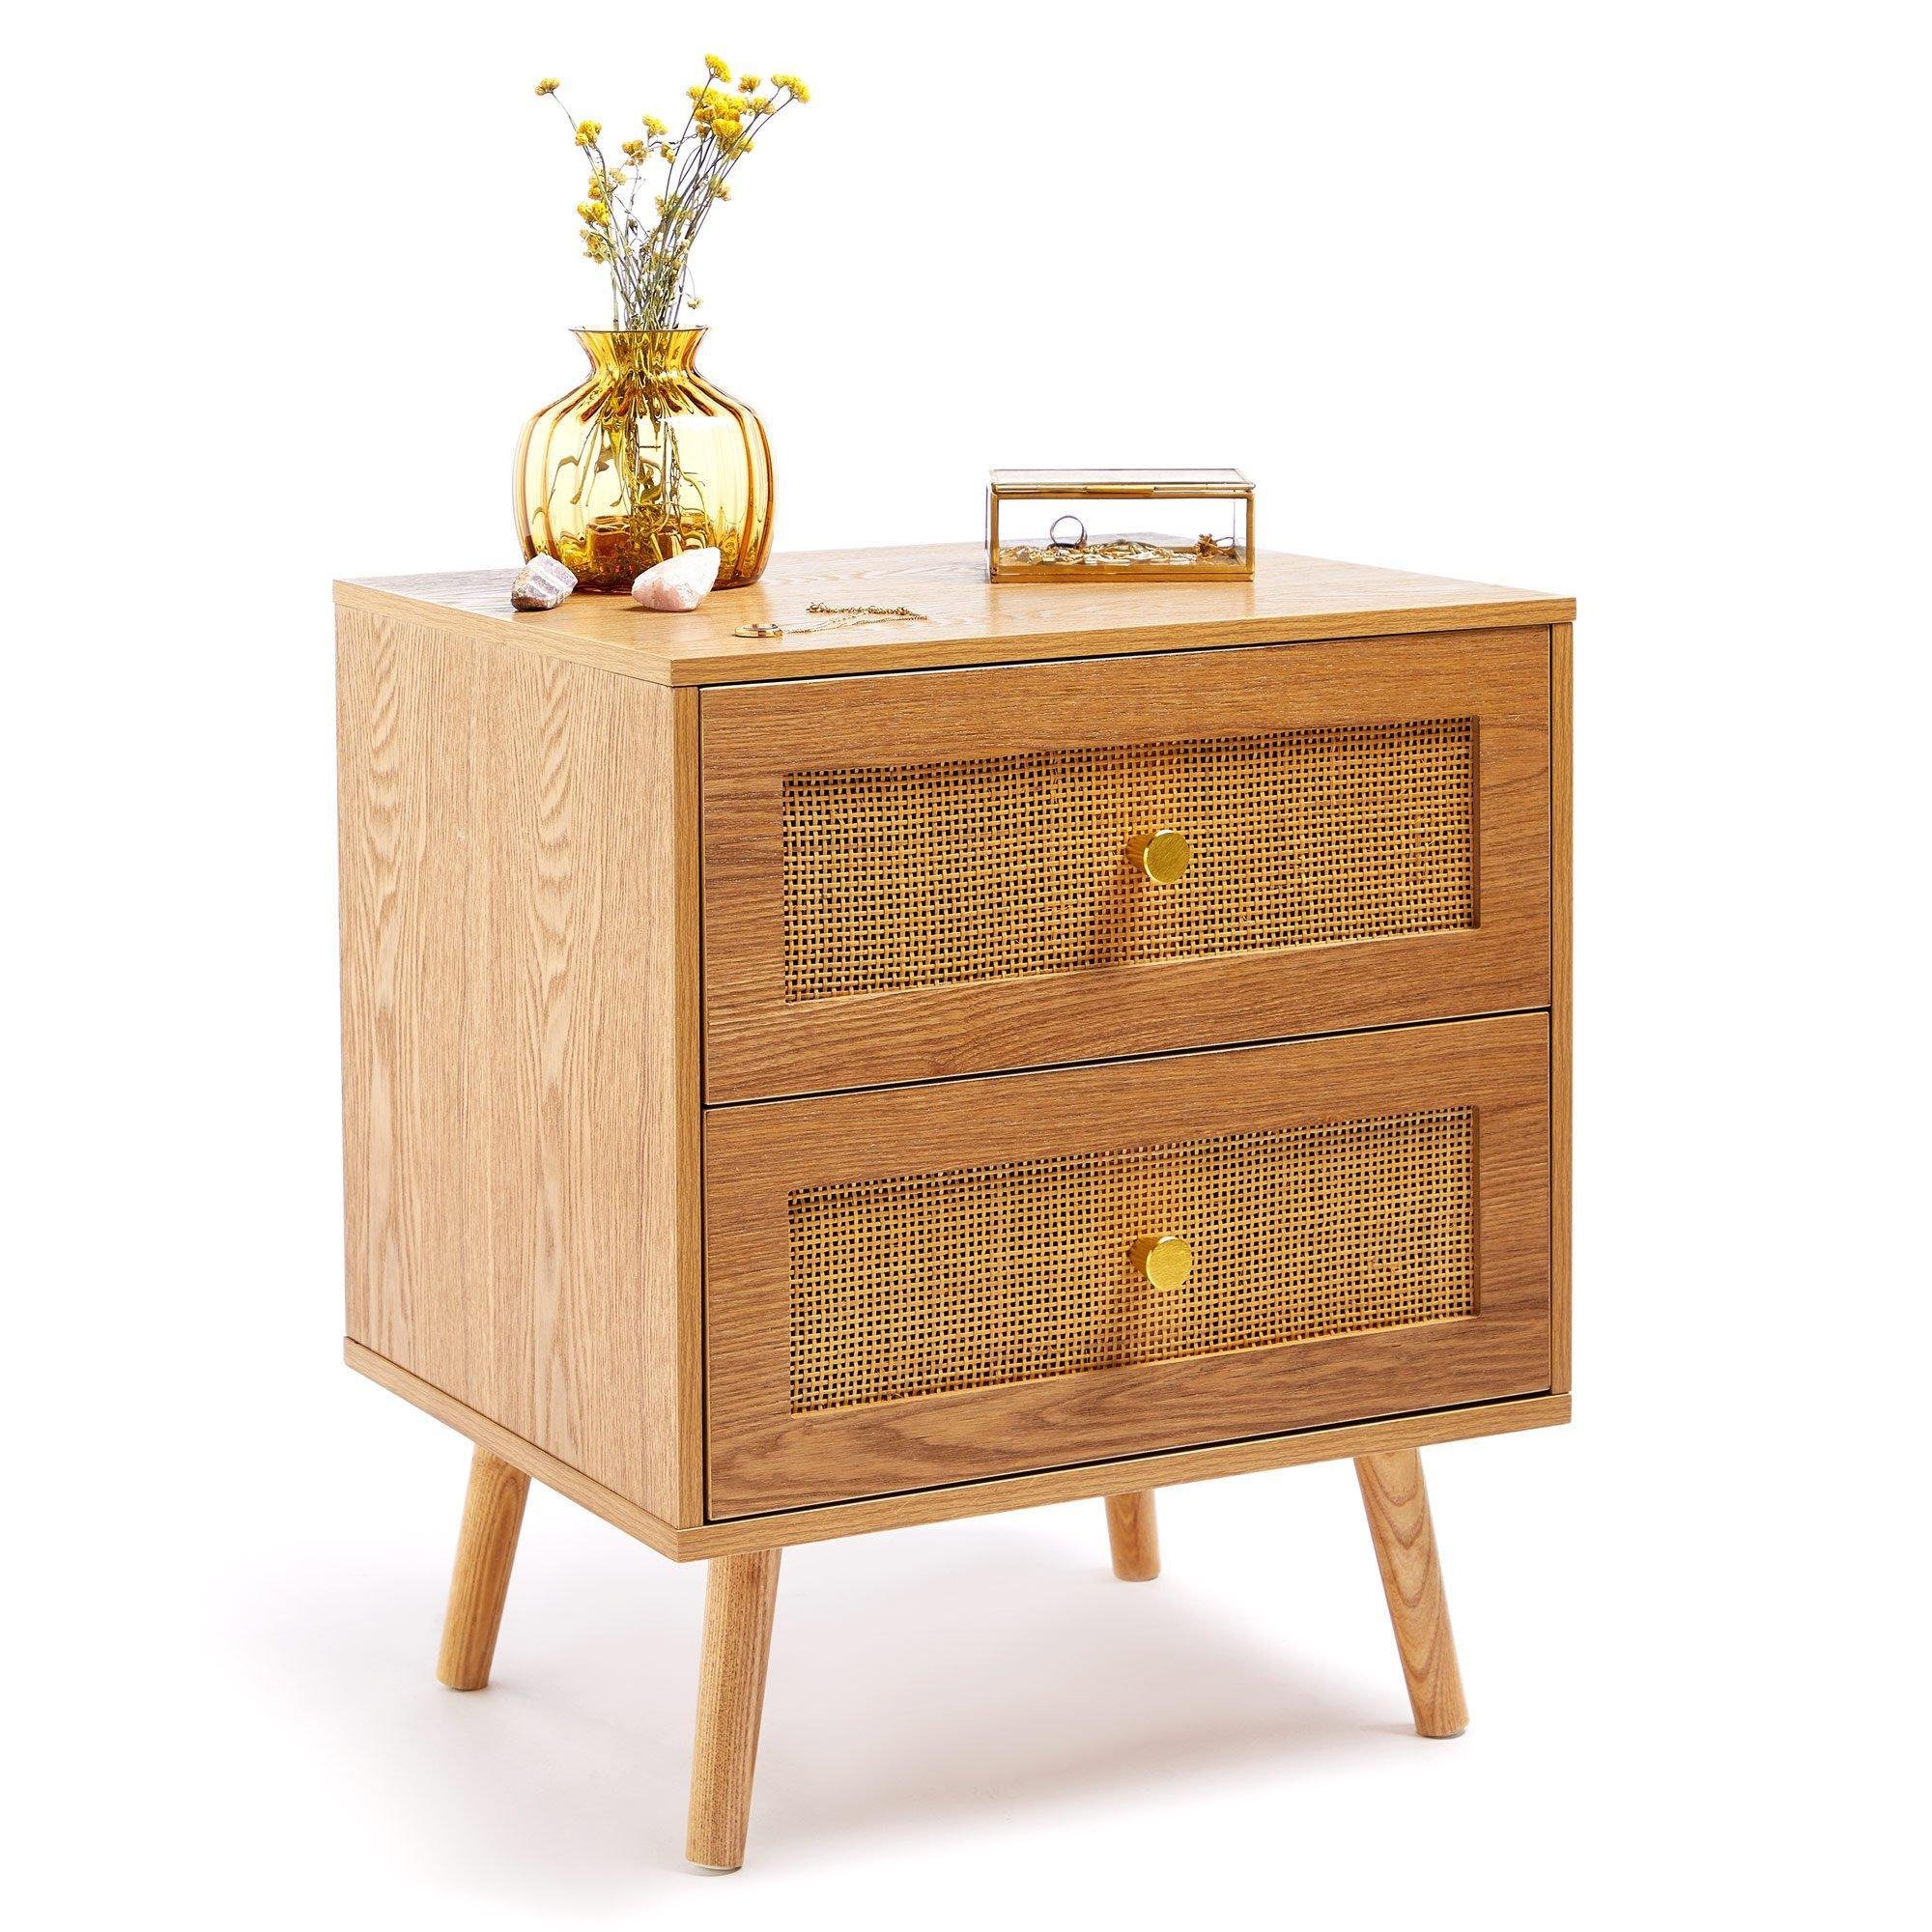 Rattan Fronted 2 Drawer with Gold Handles Bedside Table - image 1